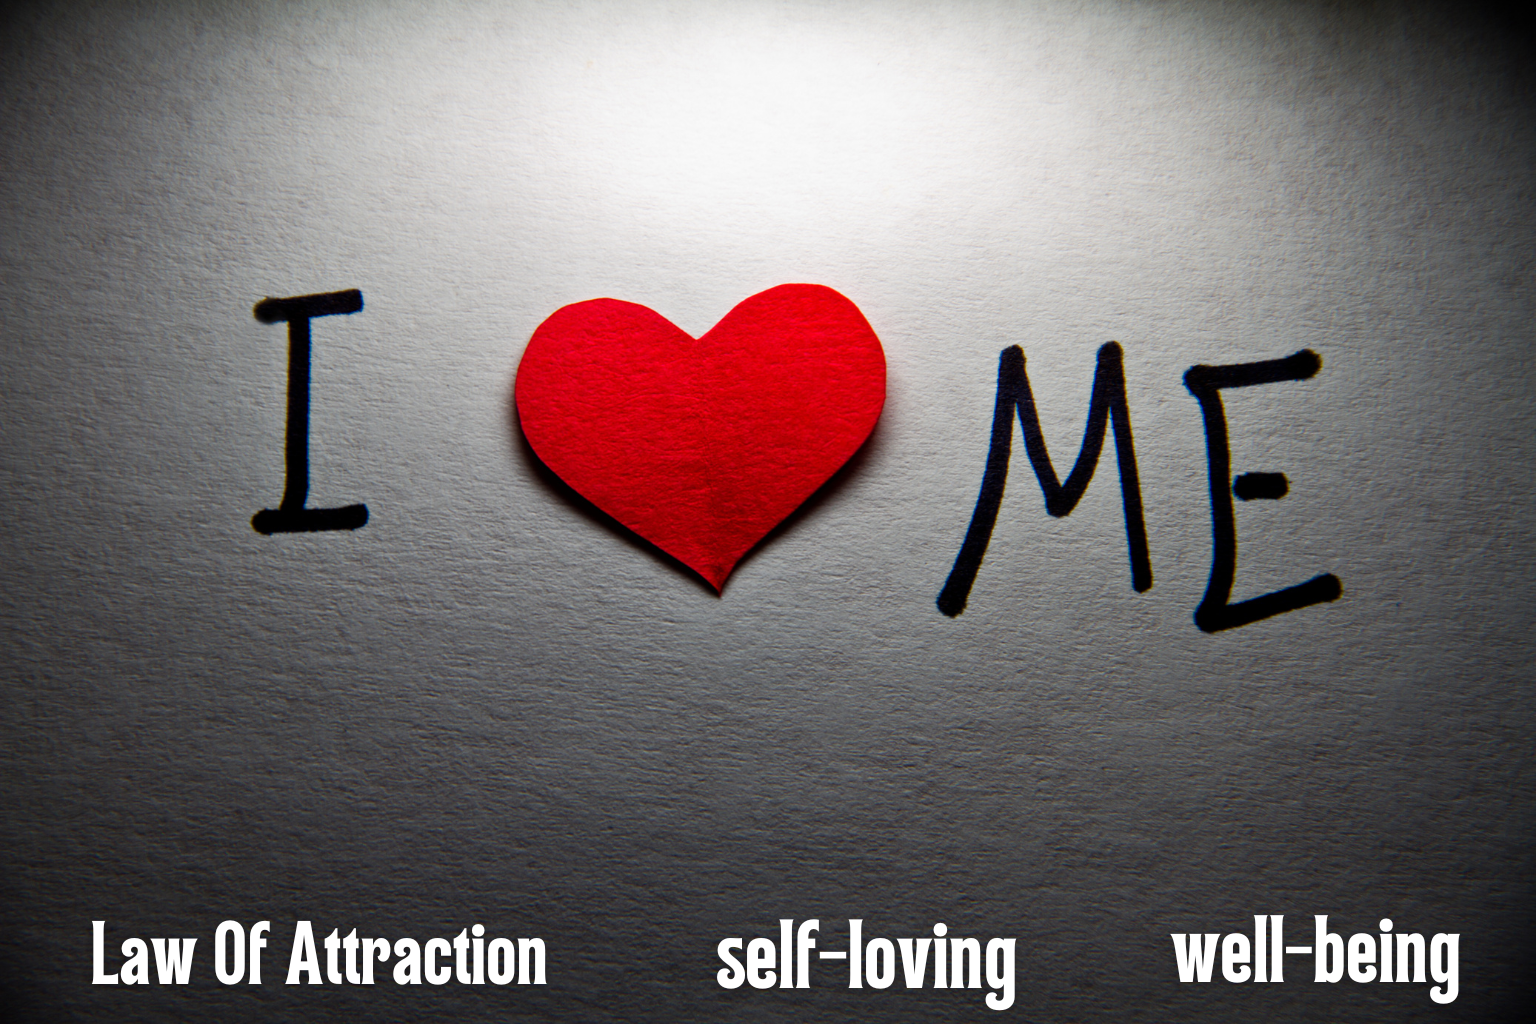 30 Ways of self-loving and well-being | Law Of Attraction, in2vortex